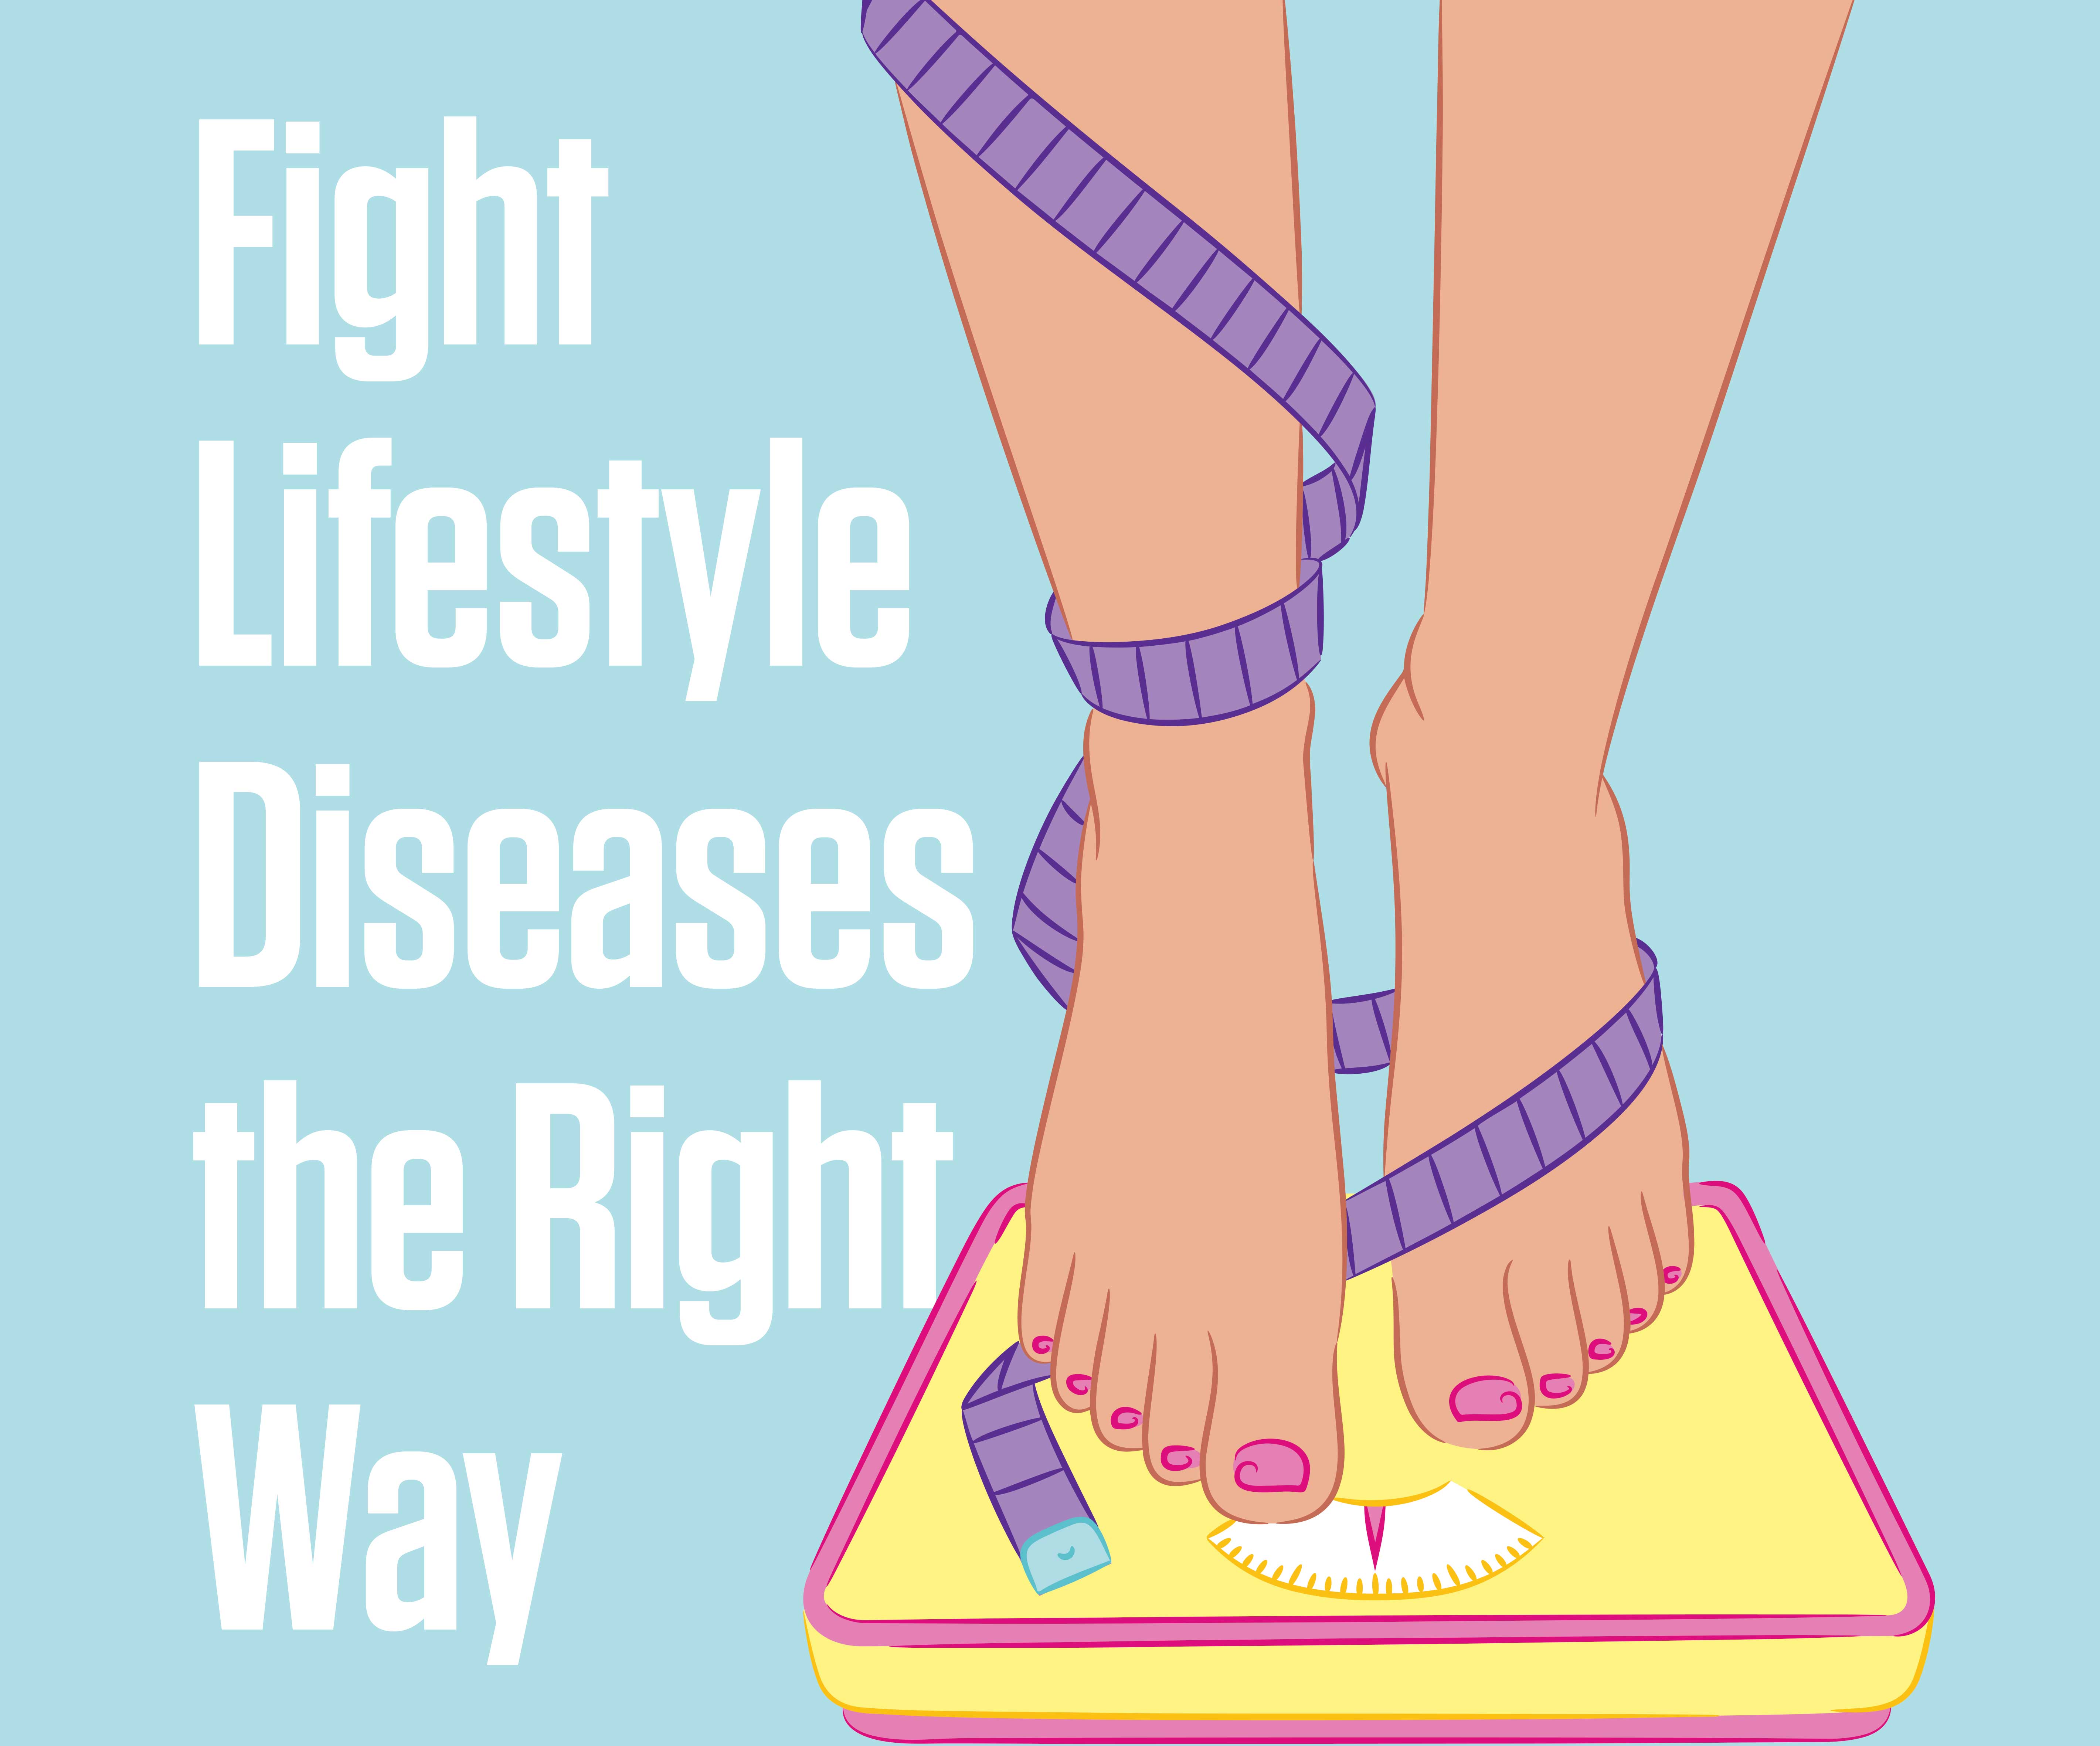 Oman Wellness: Fight lifestyle diseases the right way